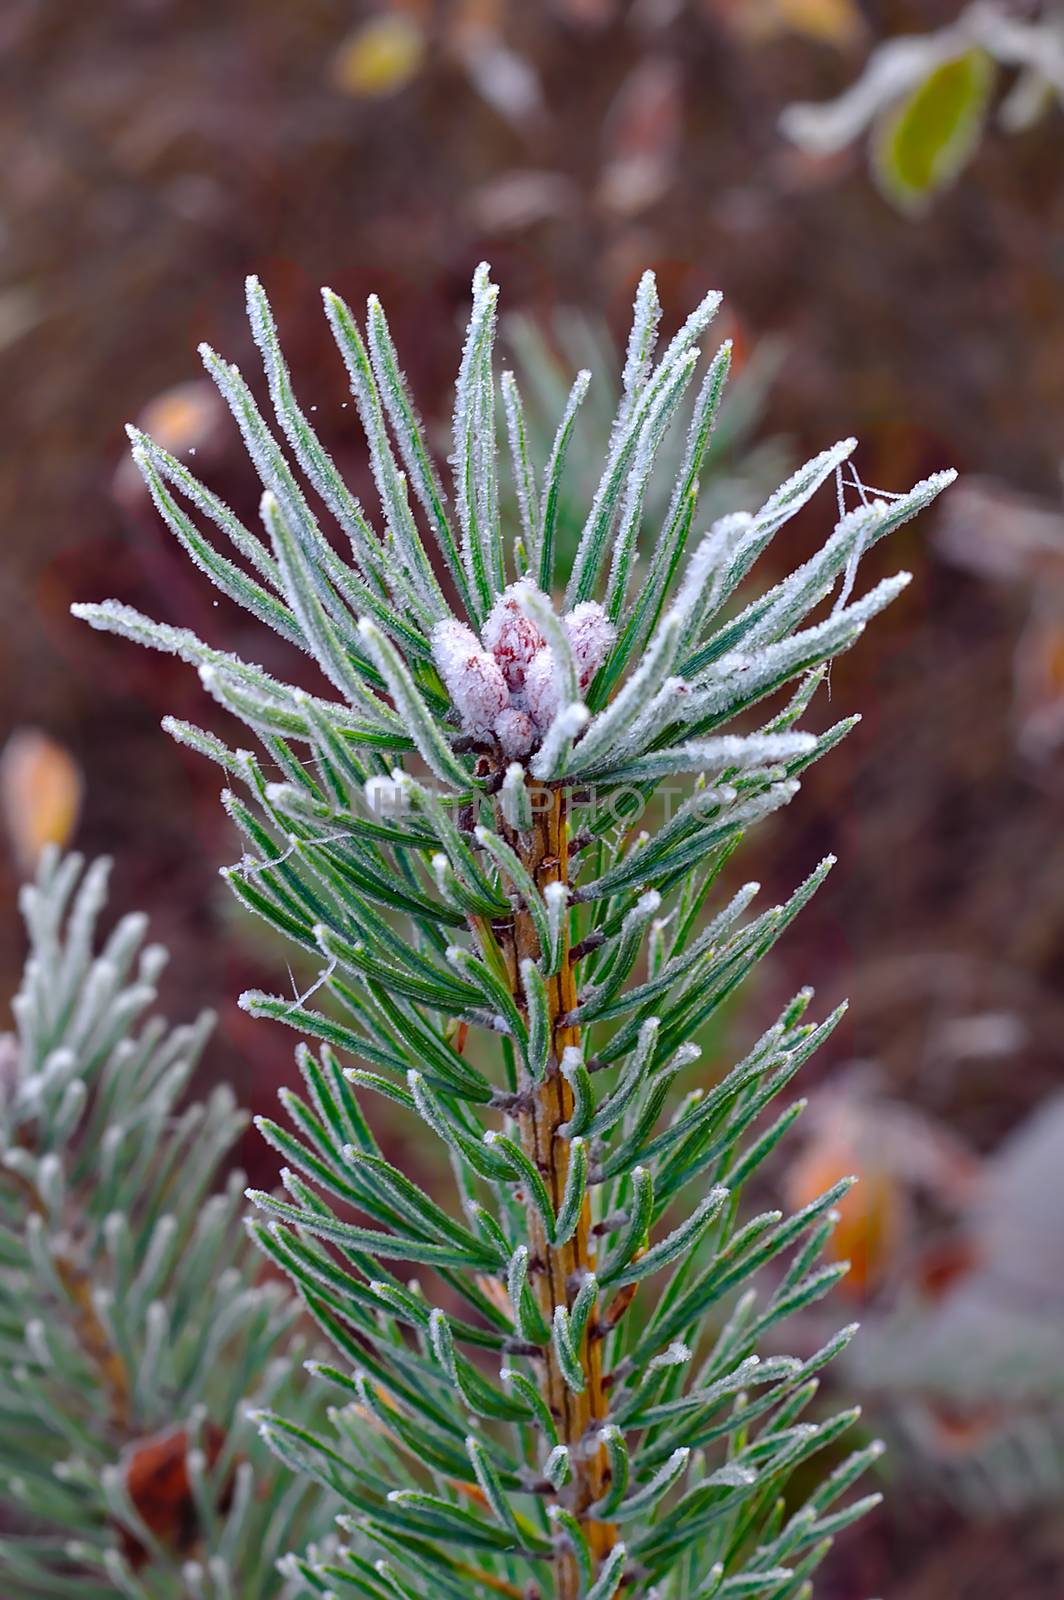 Winter is coming. Green plants and trees are turned white after night with temperatures below zero. Single evergreen branch on brown blurred background.